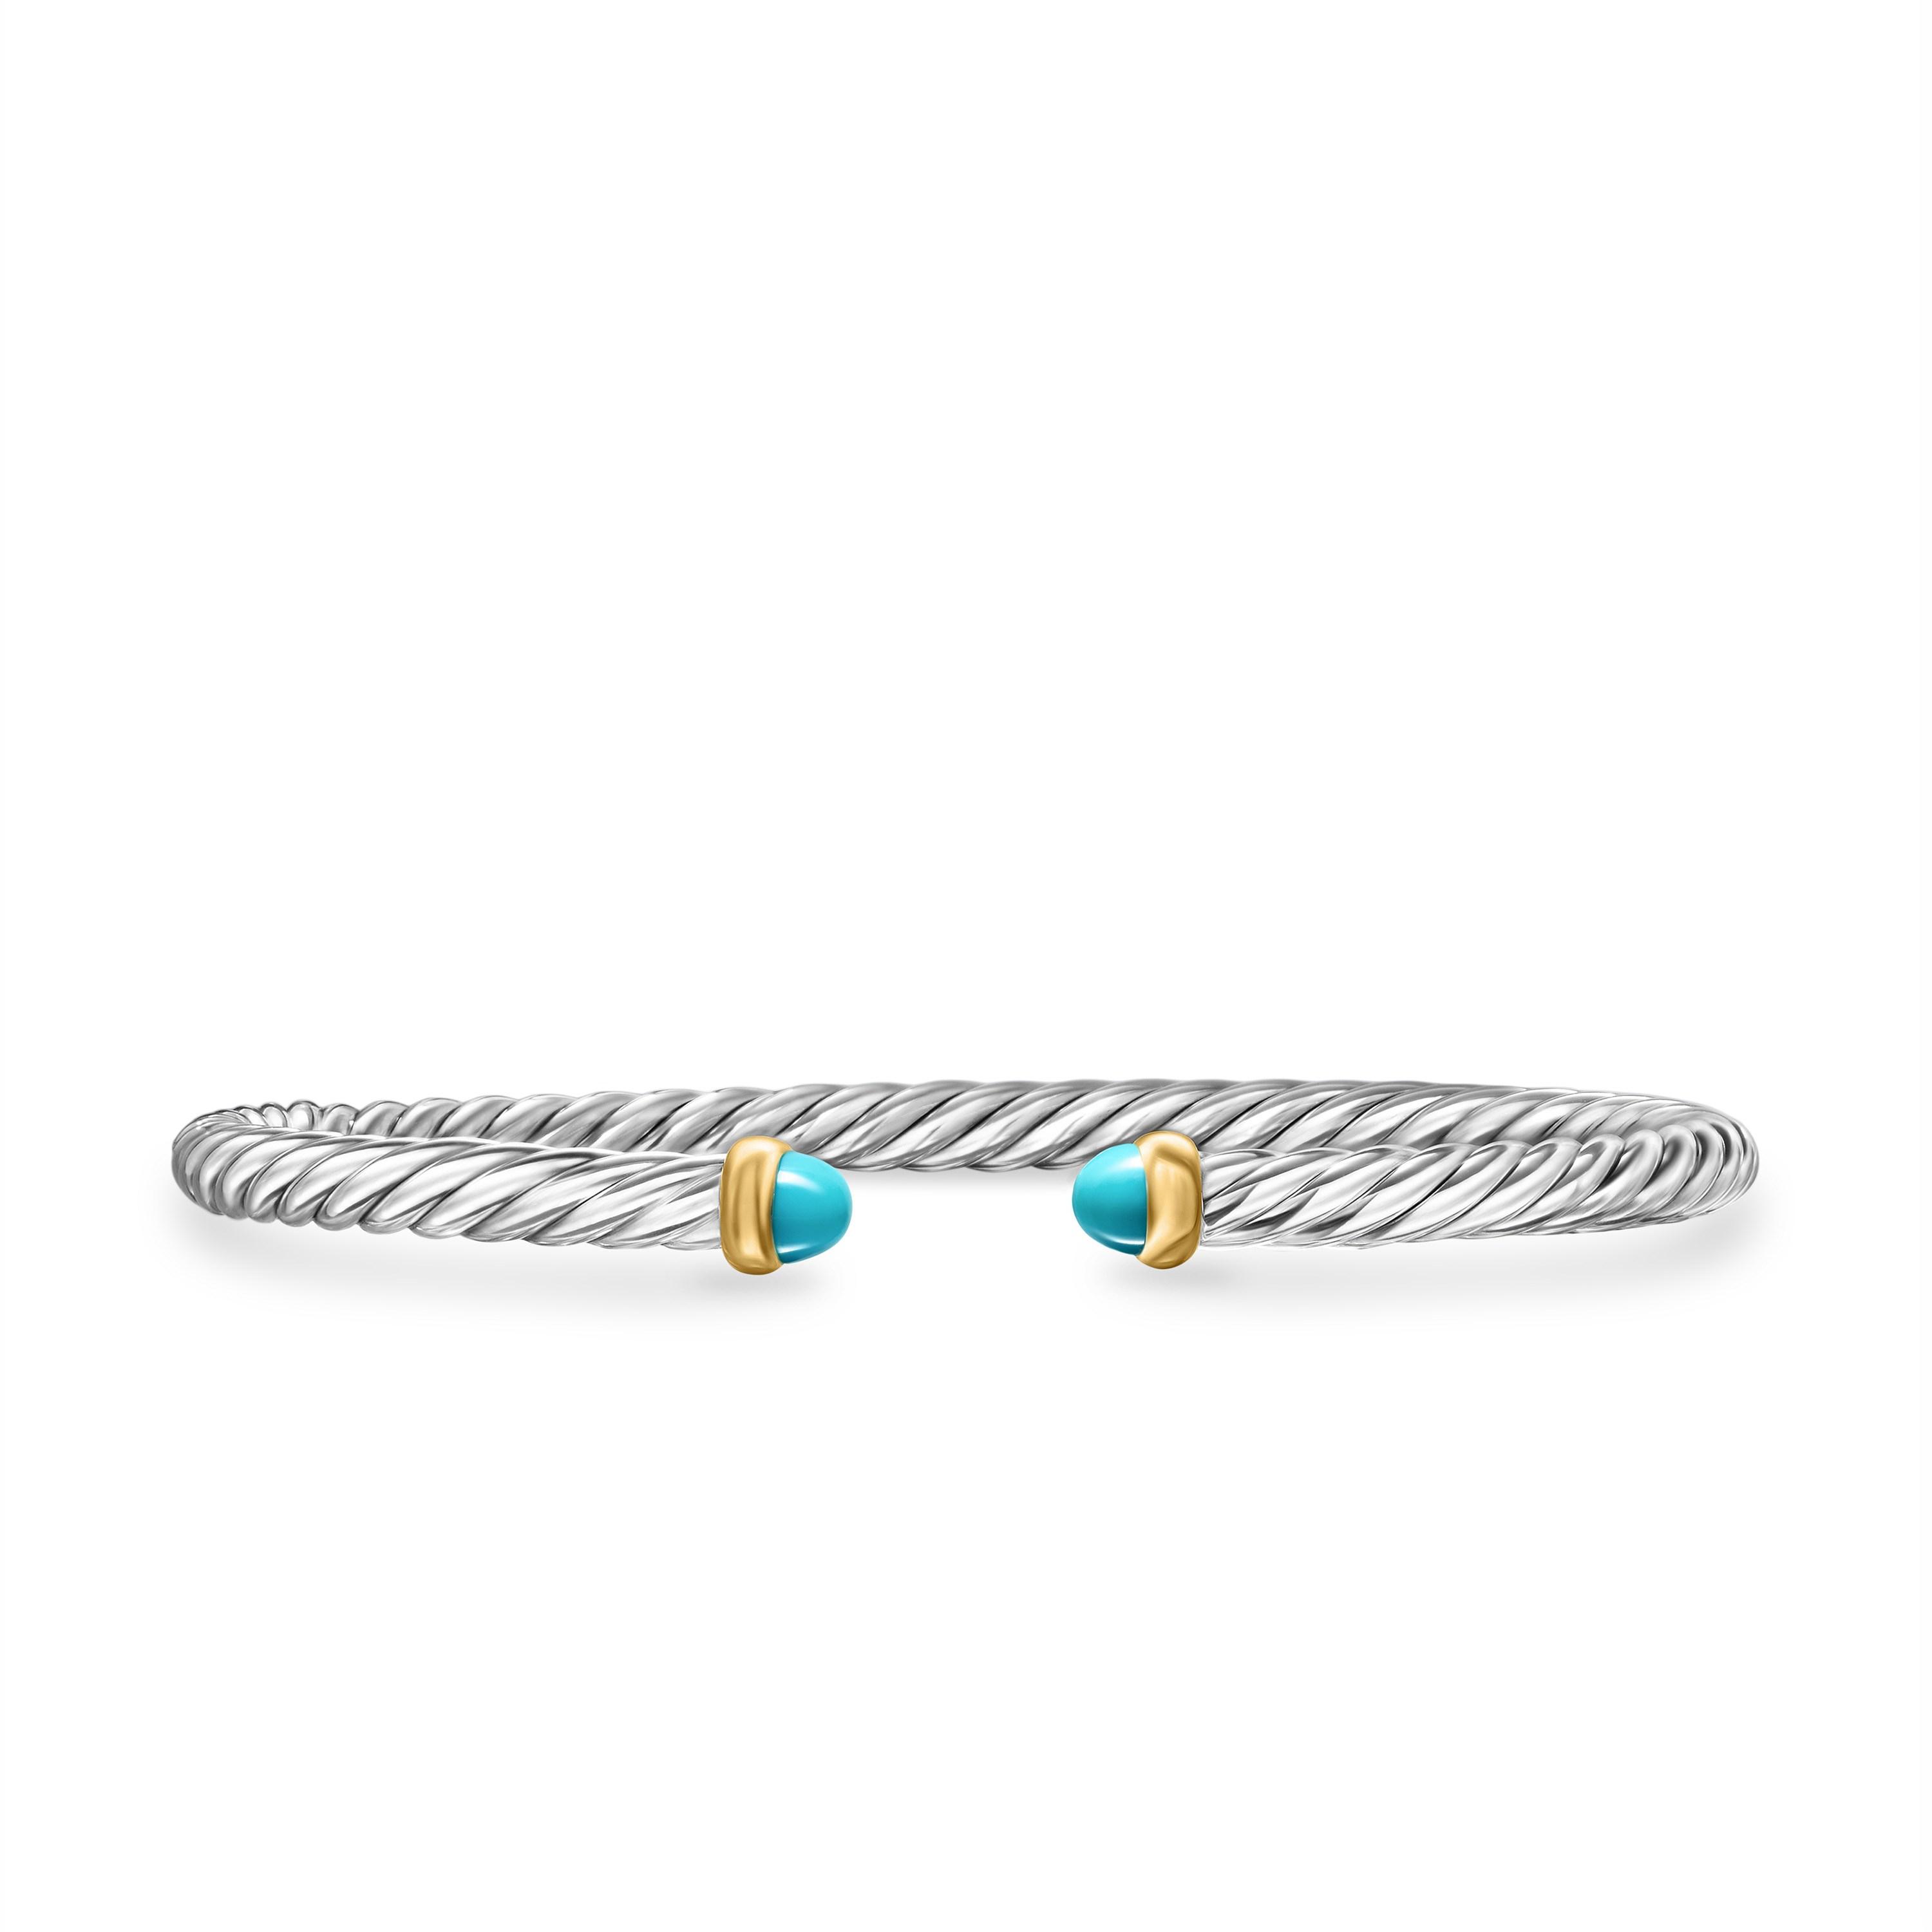 David Yurman Cable Flex Sterling Silver Bracelet with Turquoise, Size Large 0